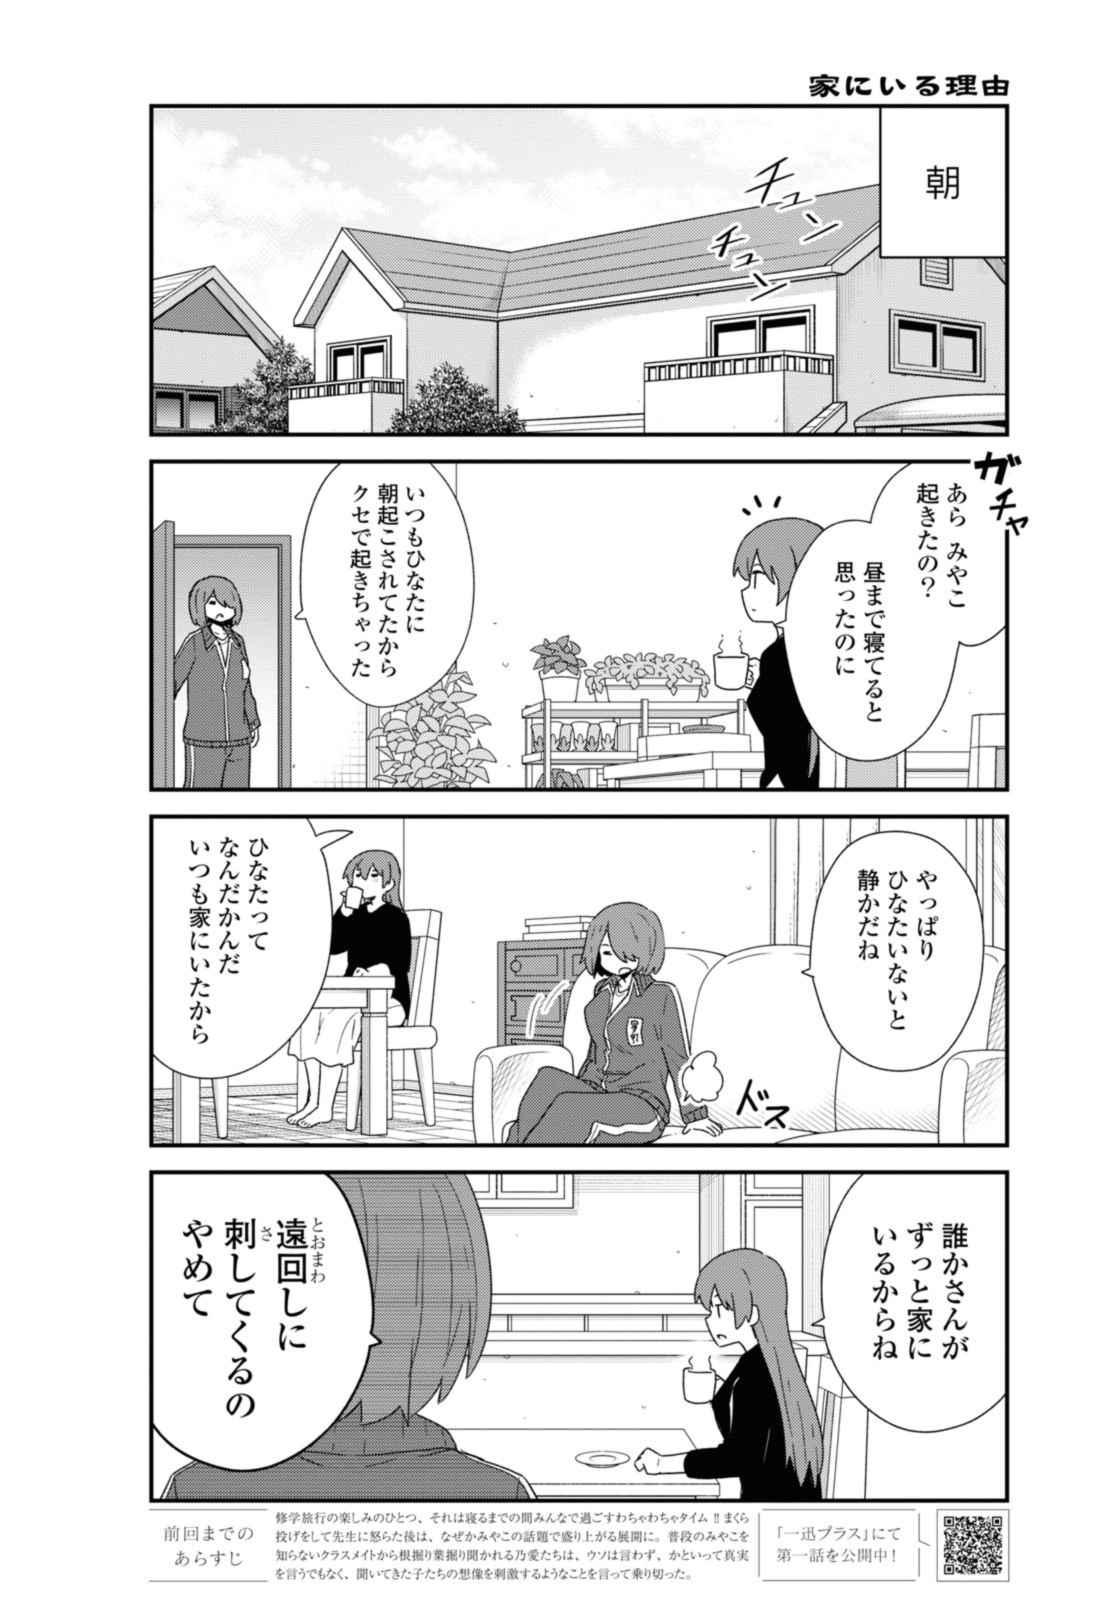 Wataten! An Angel Flew Down to Me 私に天使が舞い降りた！ 第107話 - Page 2